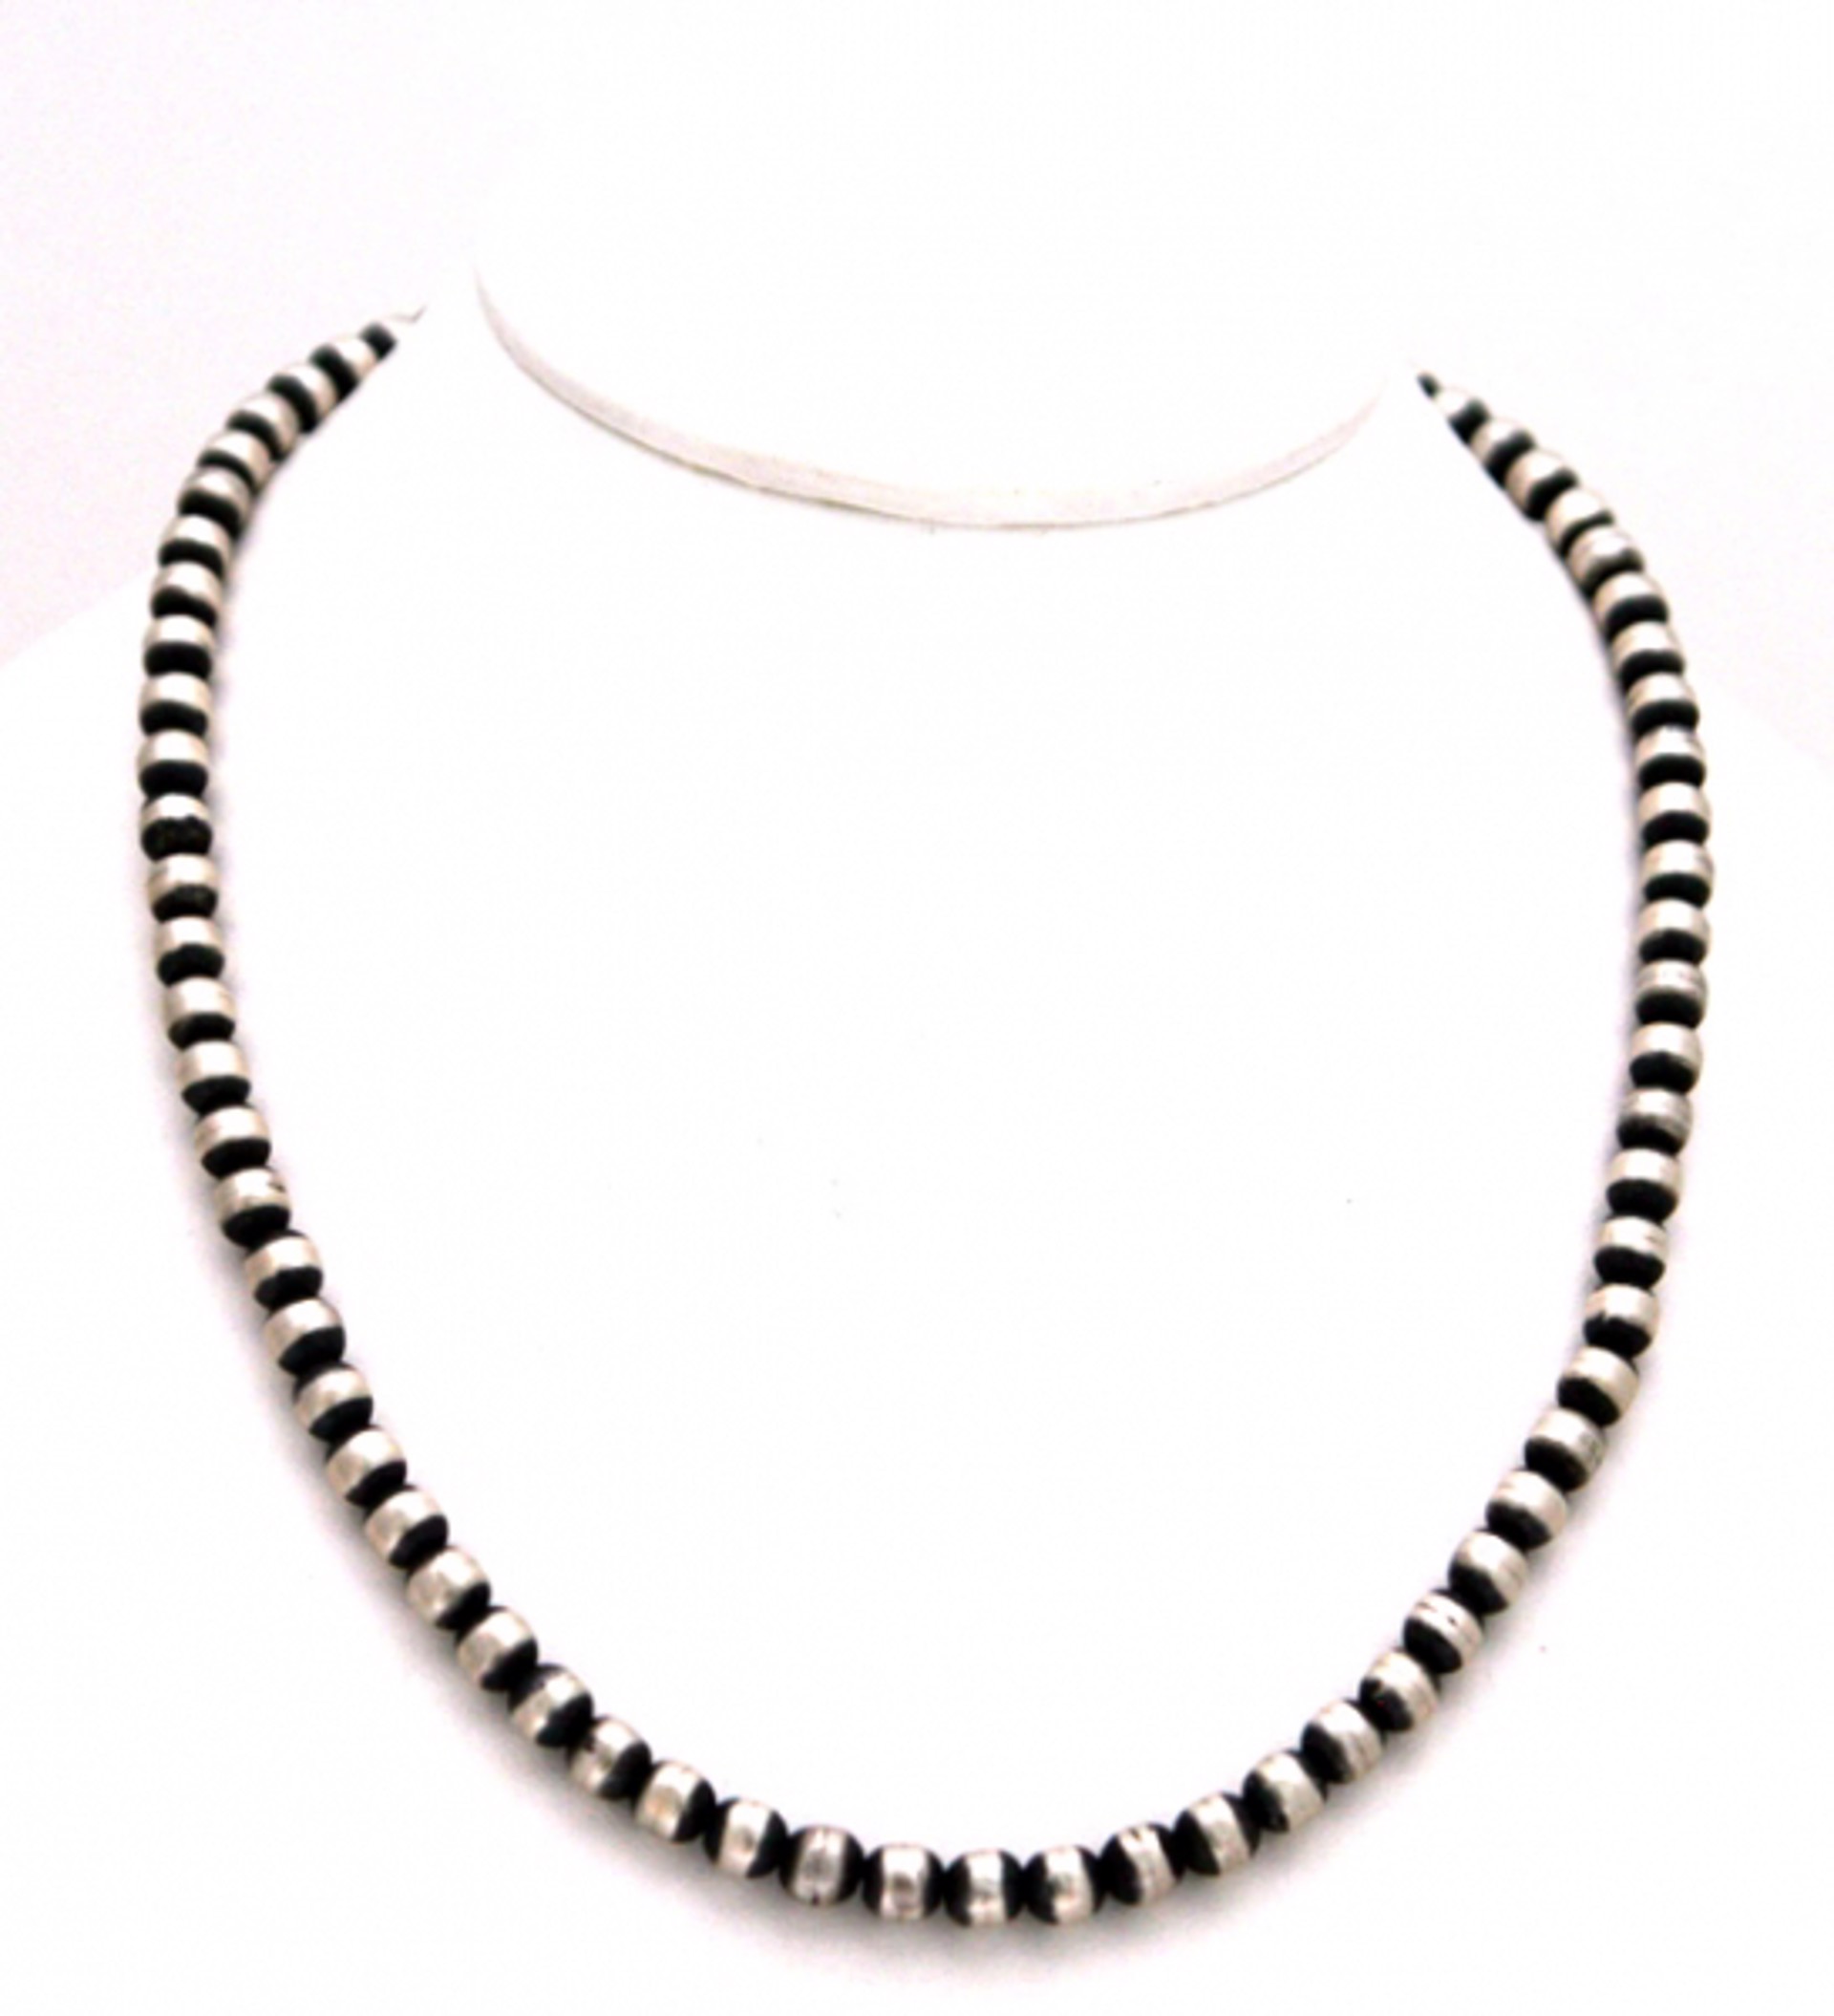 Necklace - 18" Single Strand Antiqued Silver 5MM by Dan Dodson